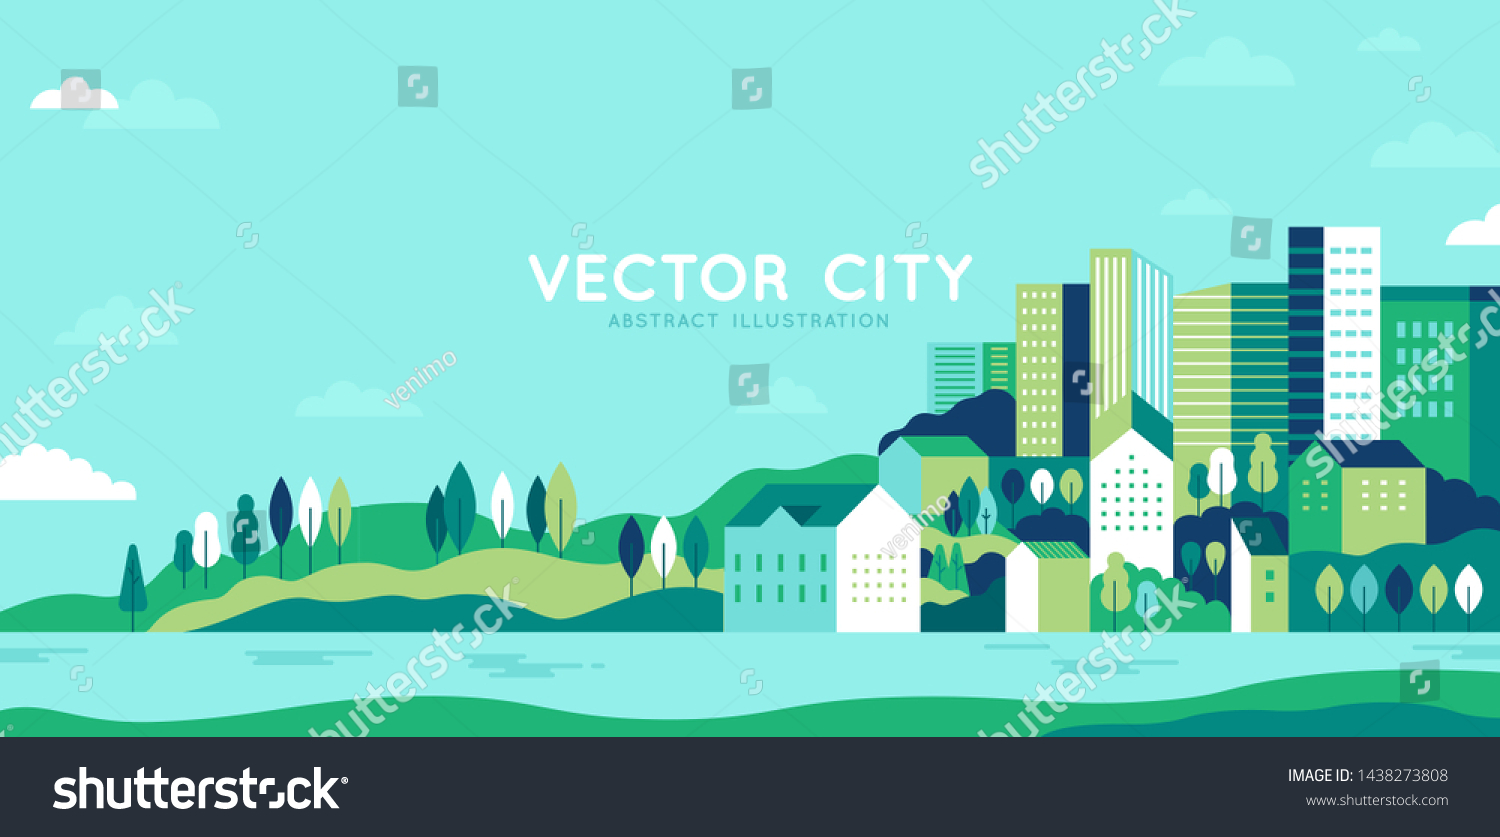 Vector illustration in simple minimal geometric flat style - city landscape with buildings, hills and trees - abstract horizontal banner and background with copy space for text - header images for web